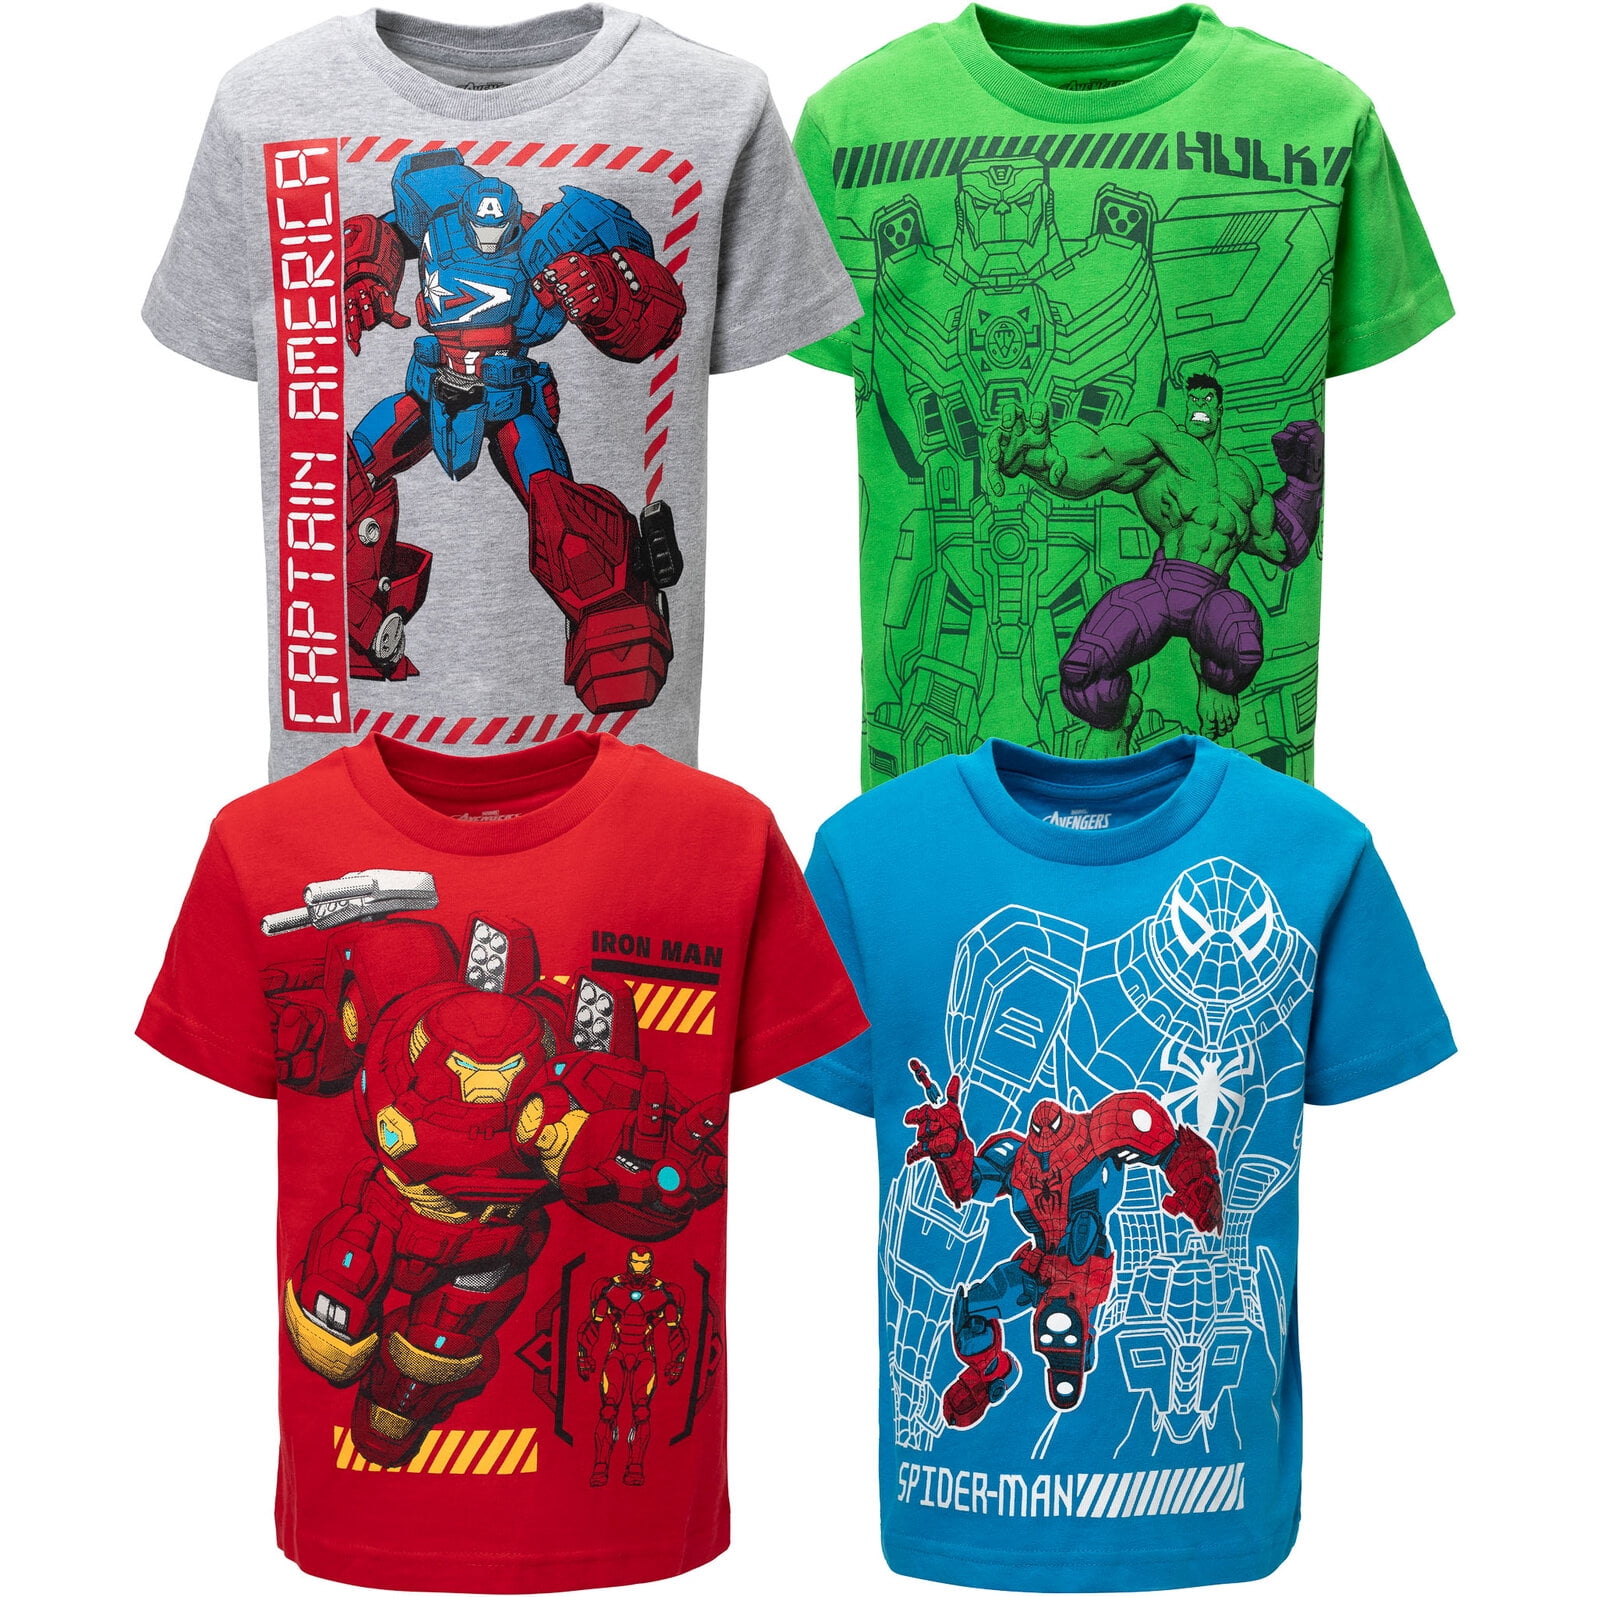 Marvel Avengers Toddler Boys L/S Red Character Print Top Size 2T $12.99 